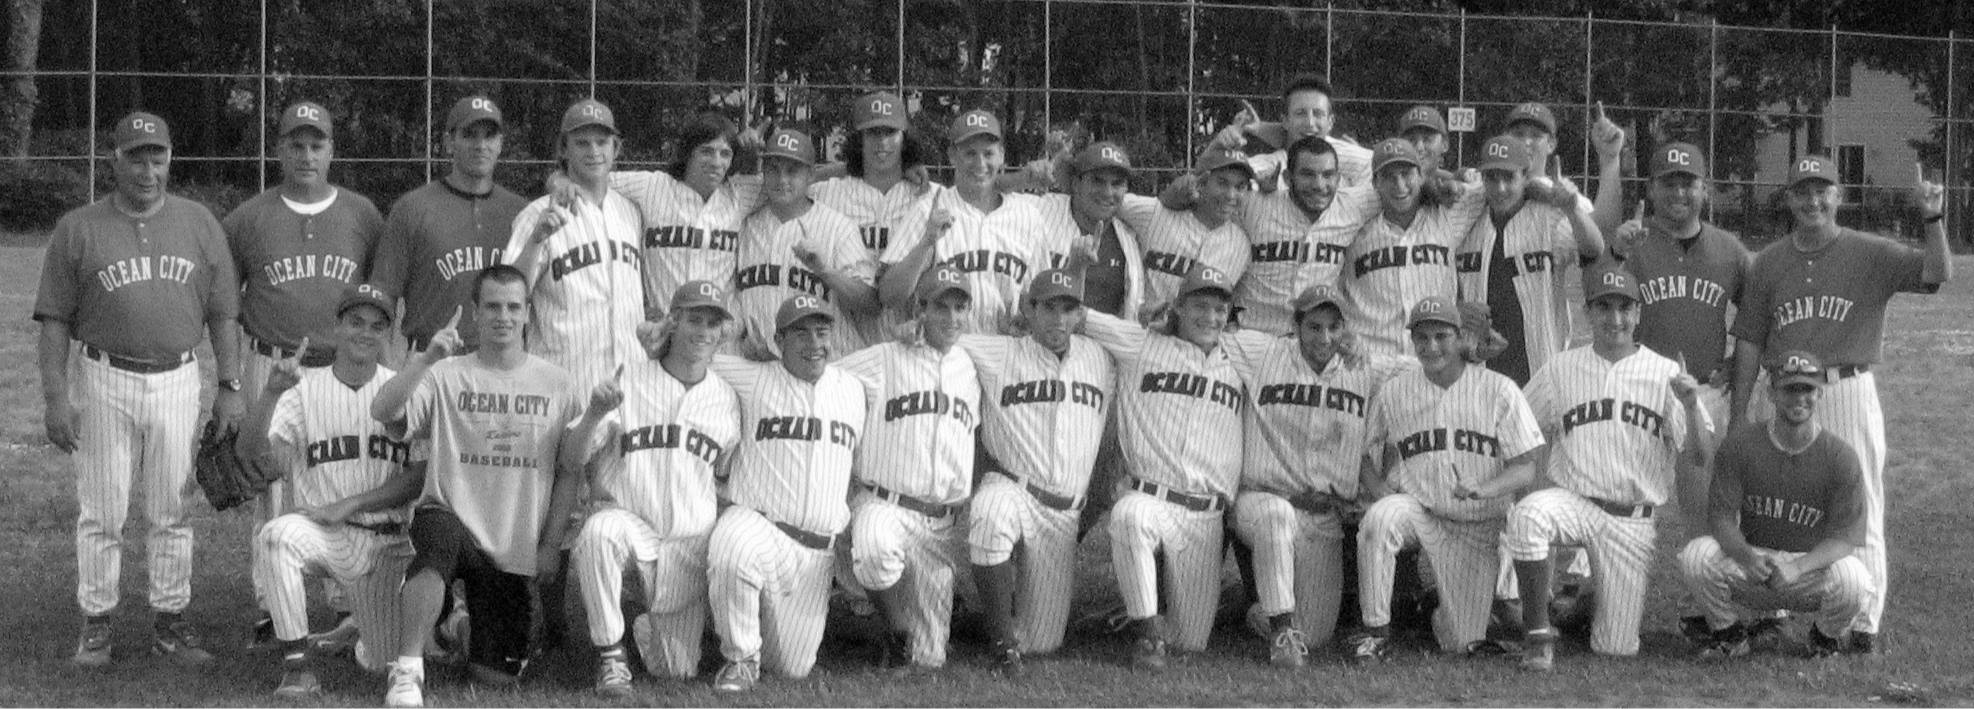 2010 Baseball Team - Inducted in 2019